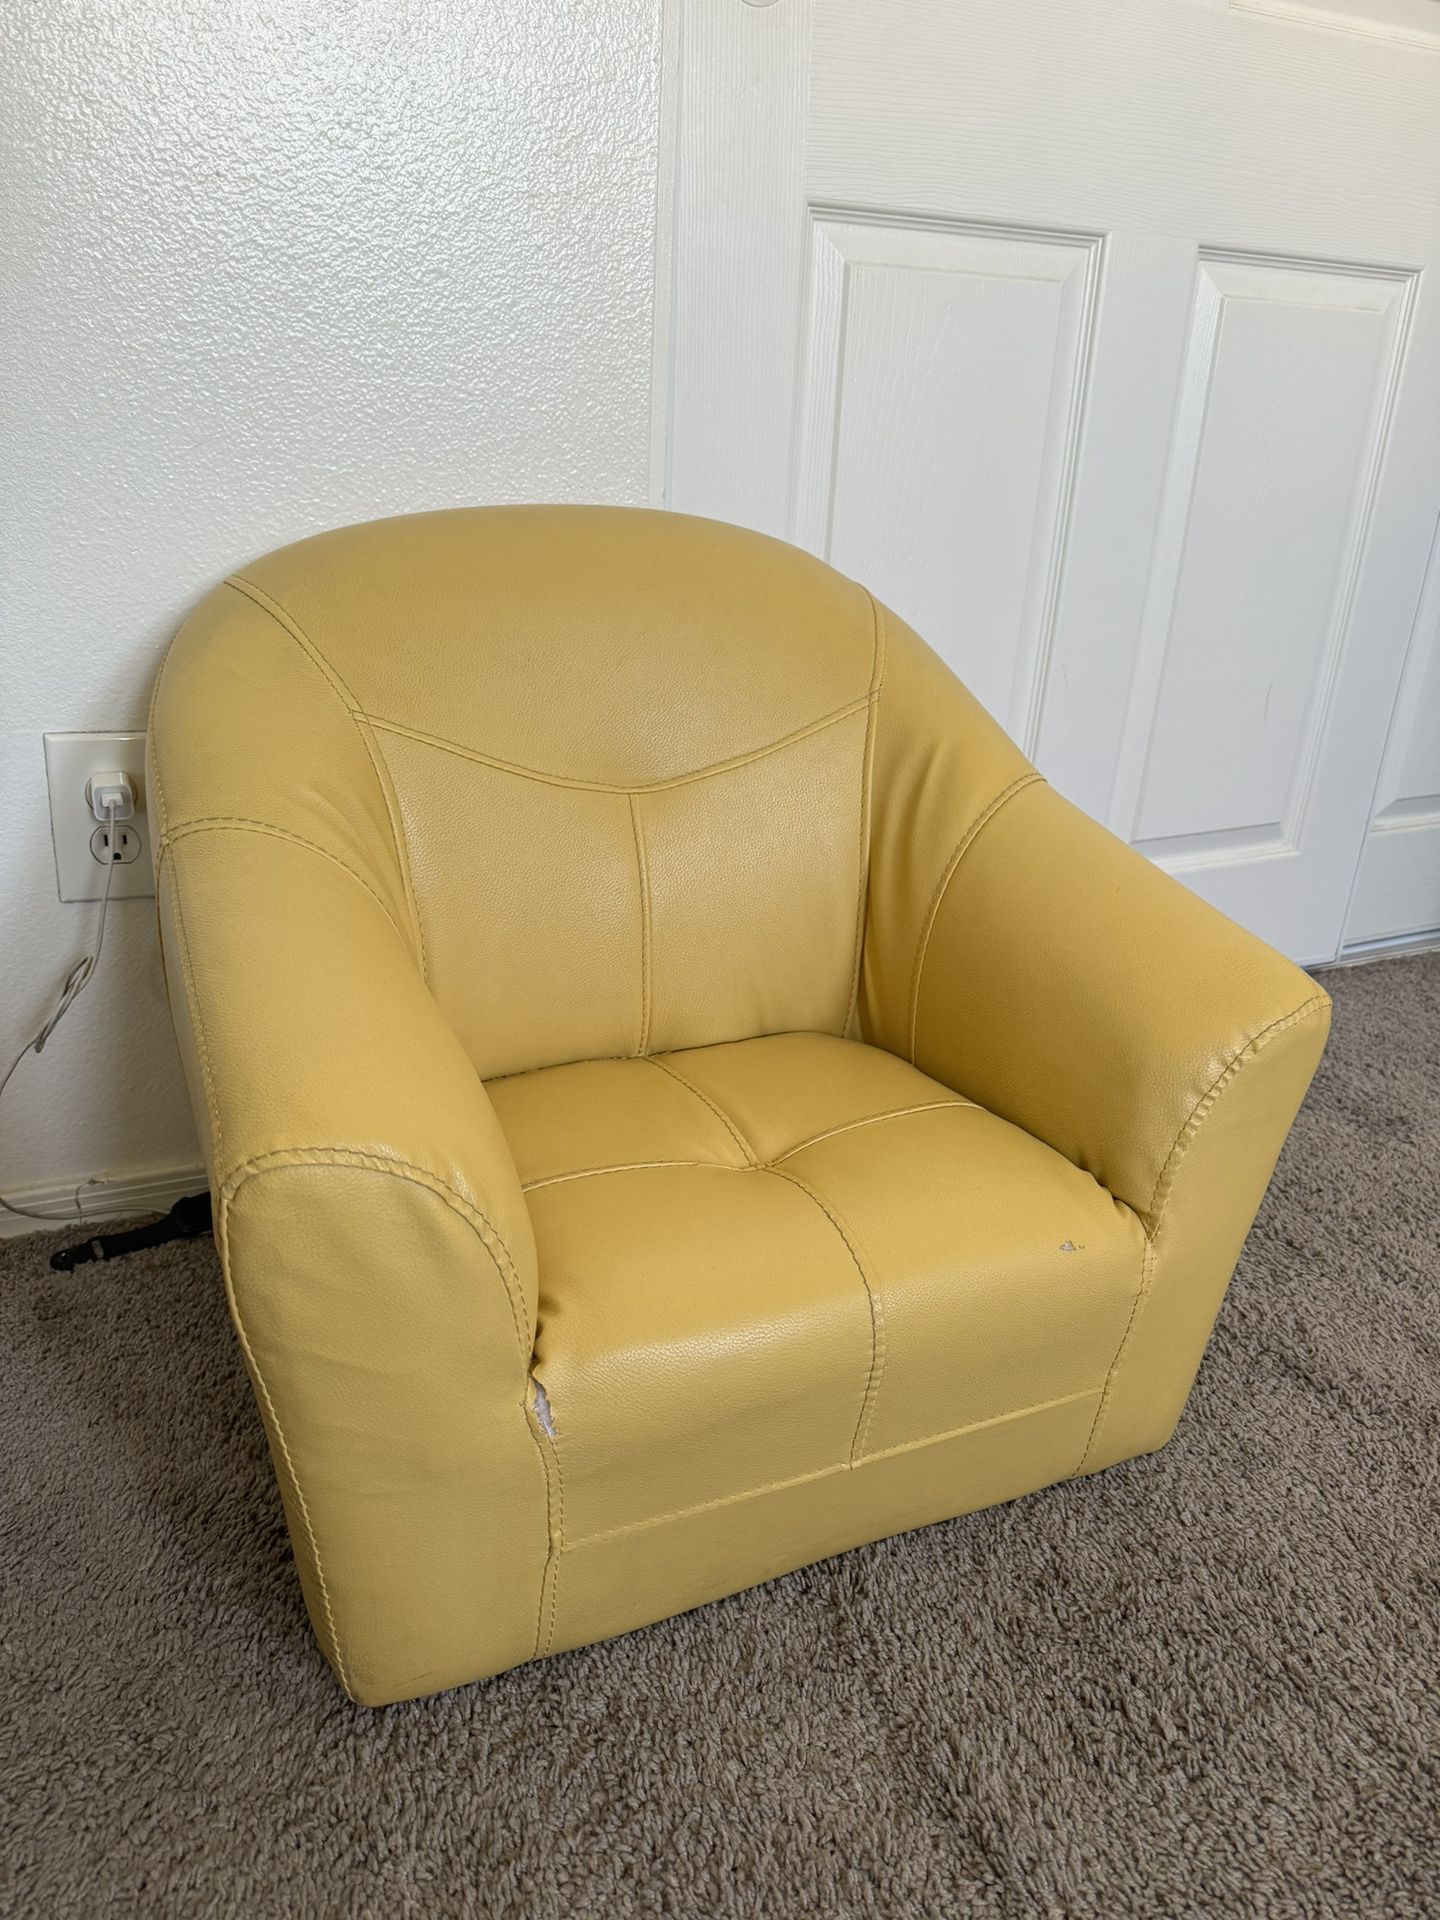 Yellow Marshmallow Couch 